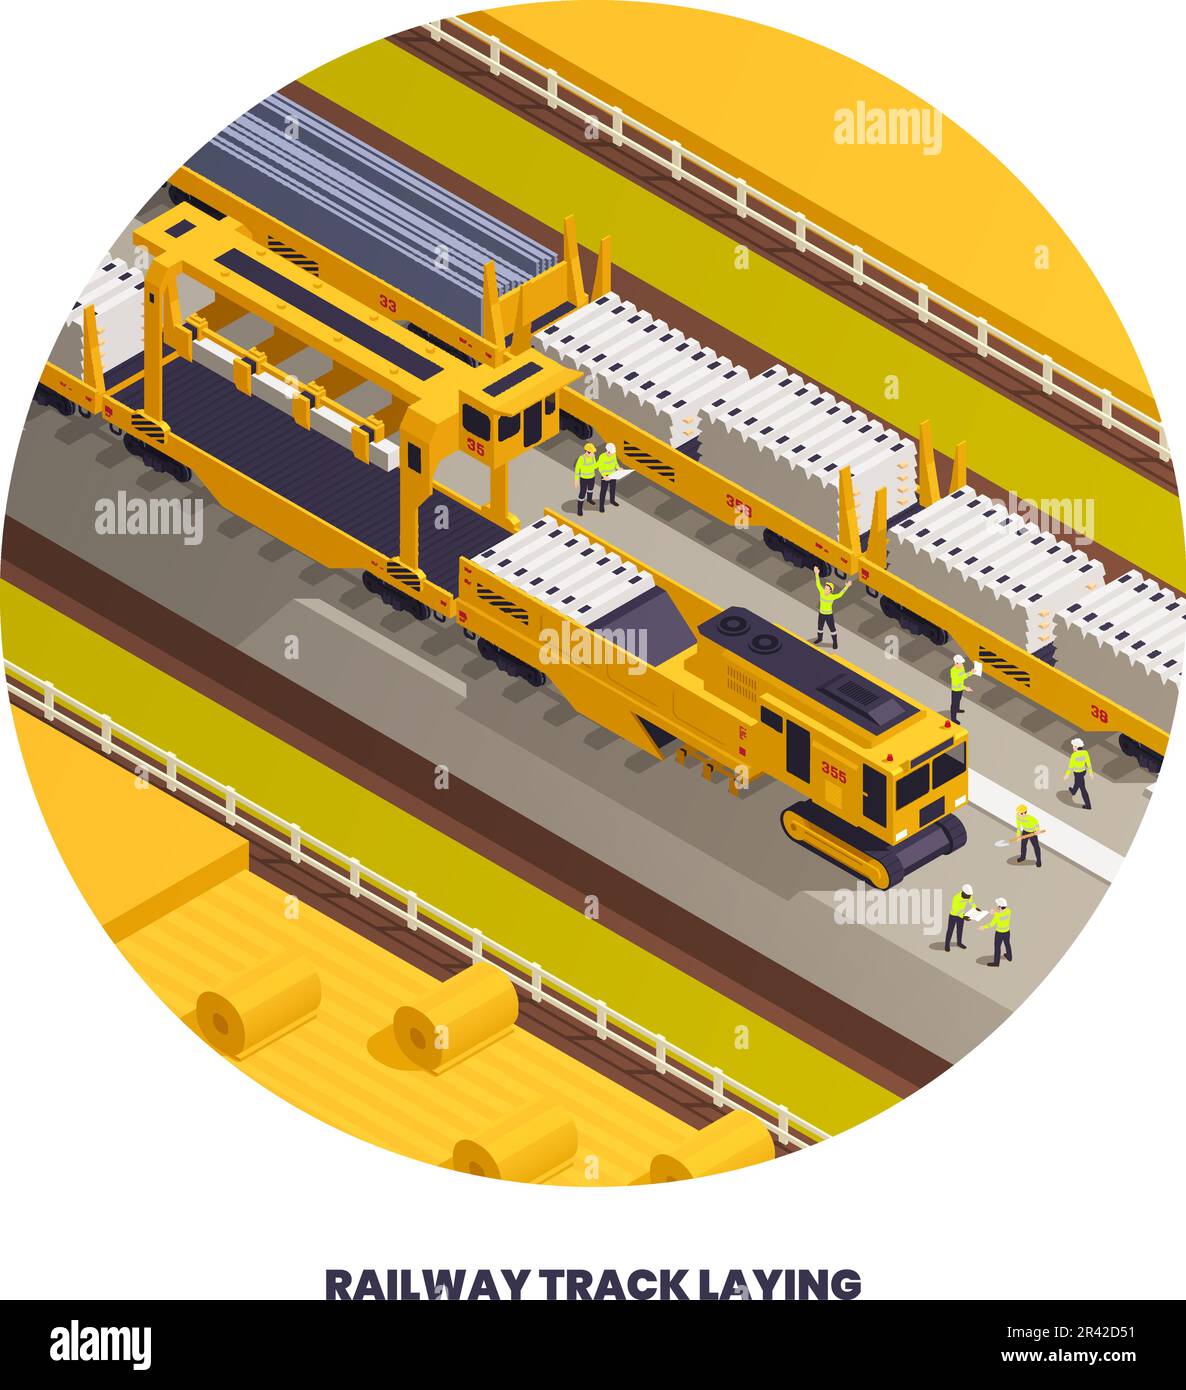 Round composition with railroad track laying construction vehicles railway equipment machines isometric images and editable text vector illustration Stock Vector